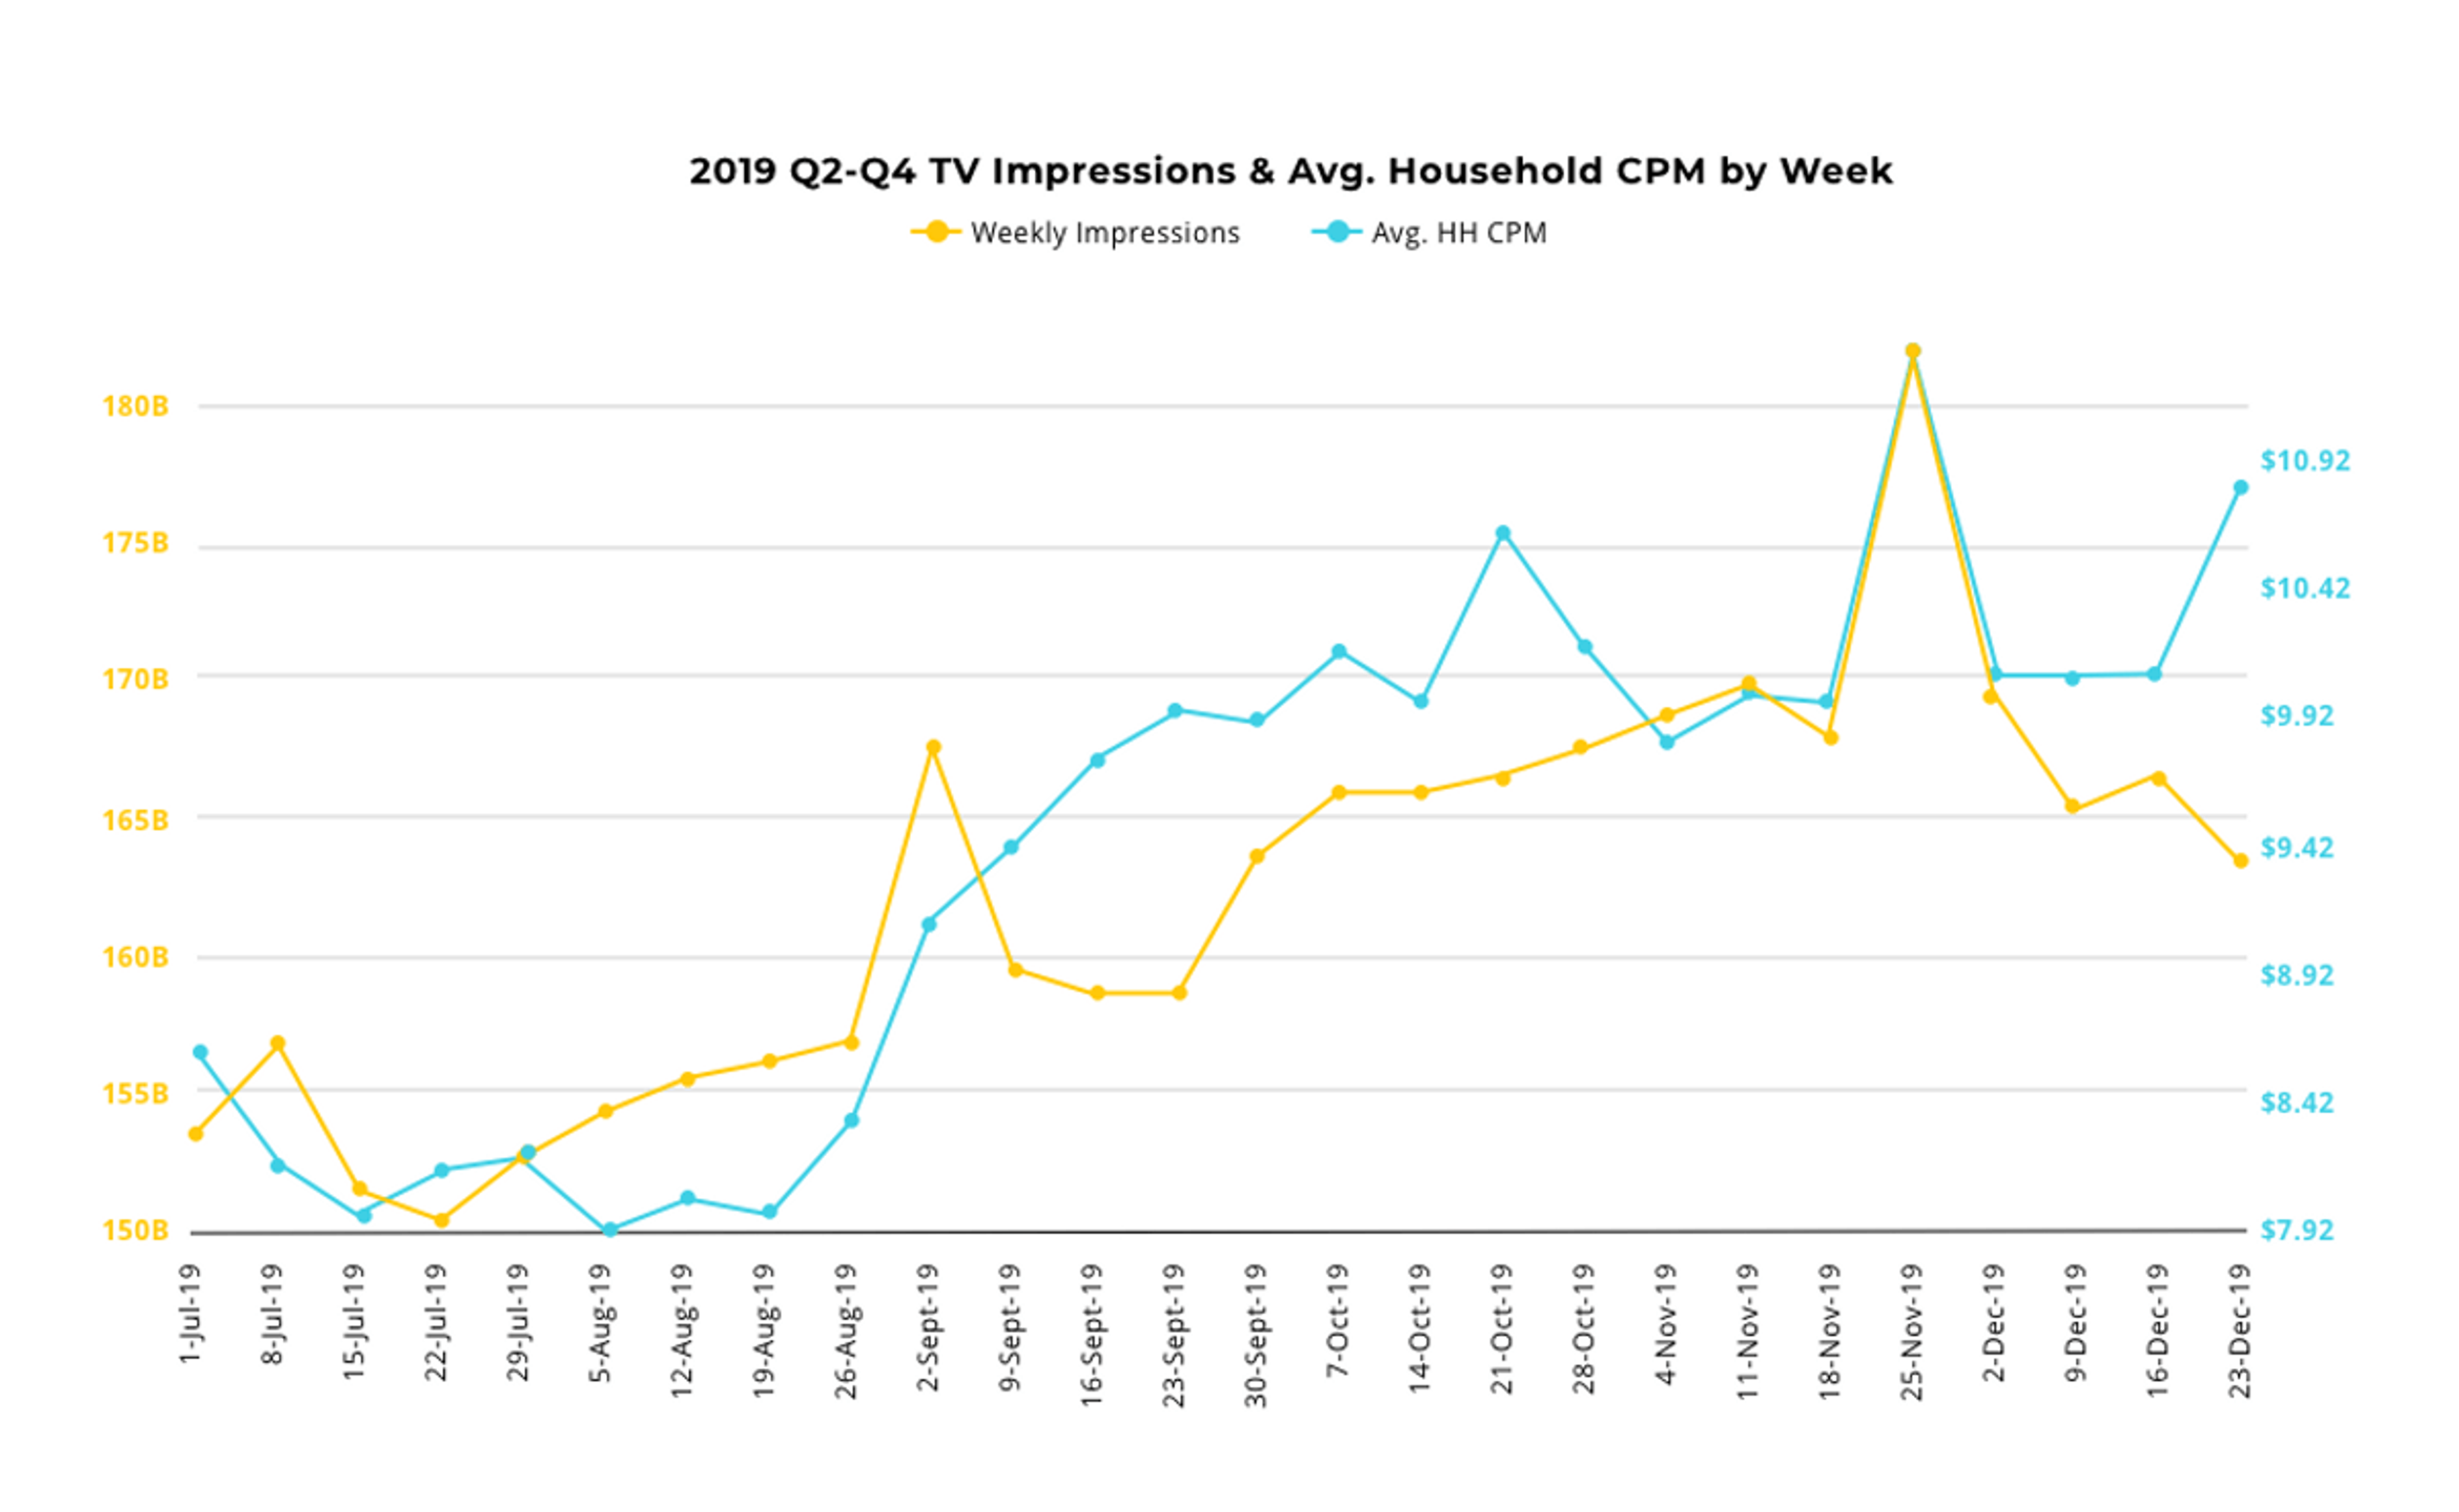 Line chart showing Q2-Q4 2019 TV impressions and avg. household CPM by week.